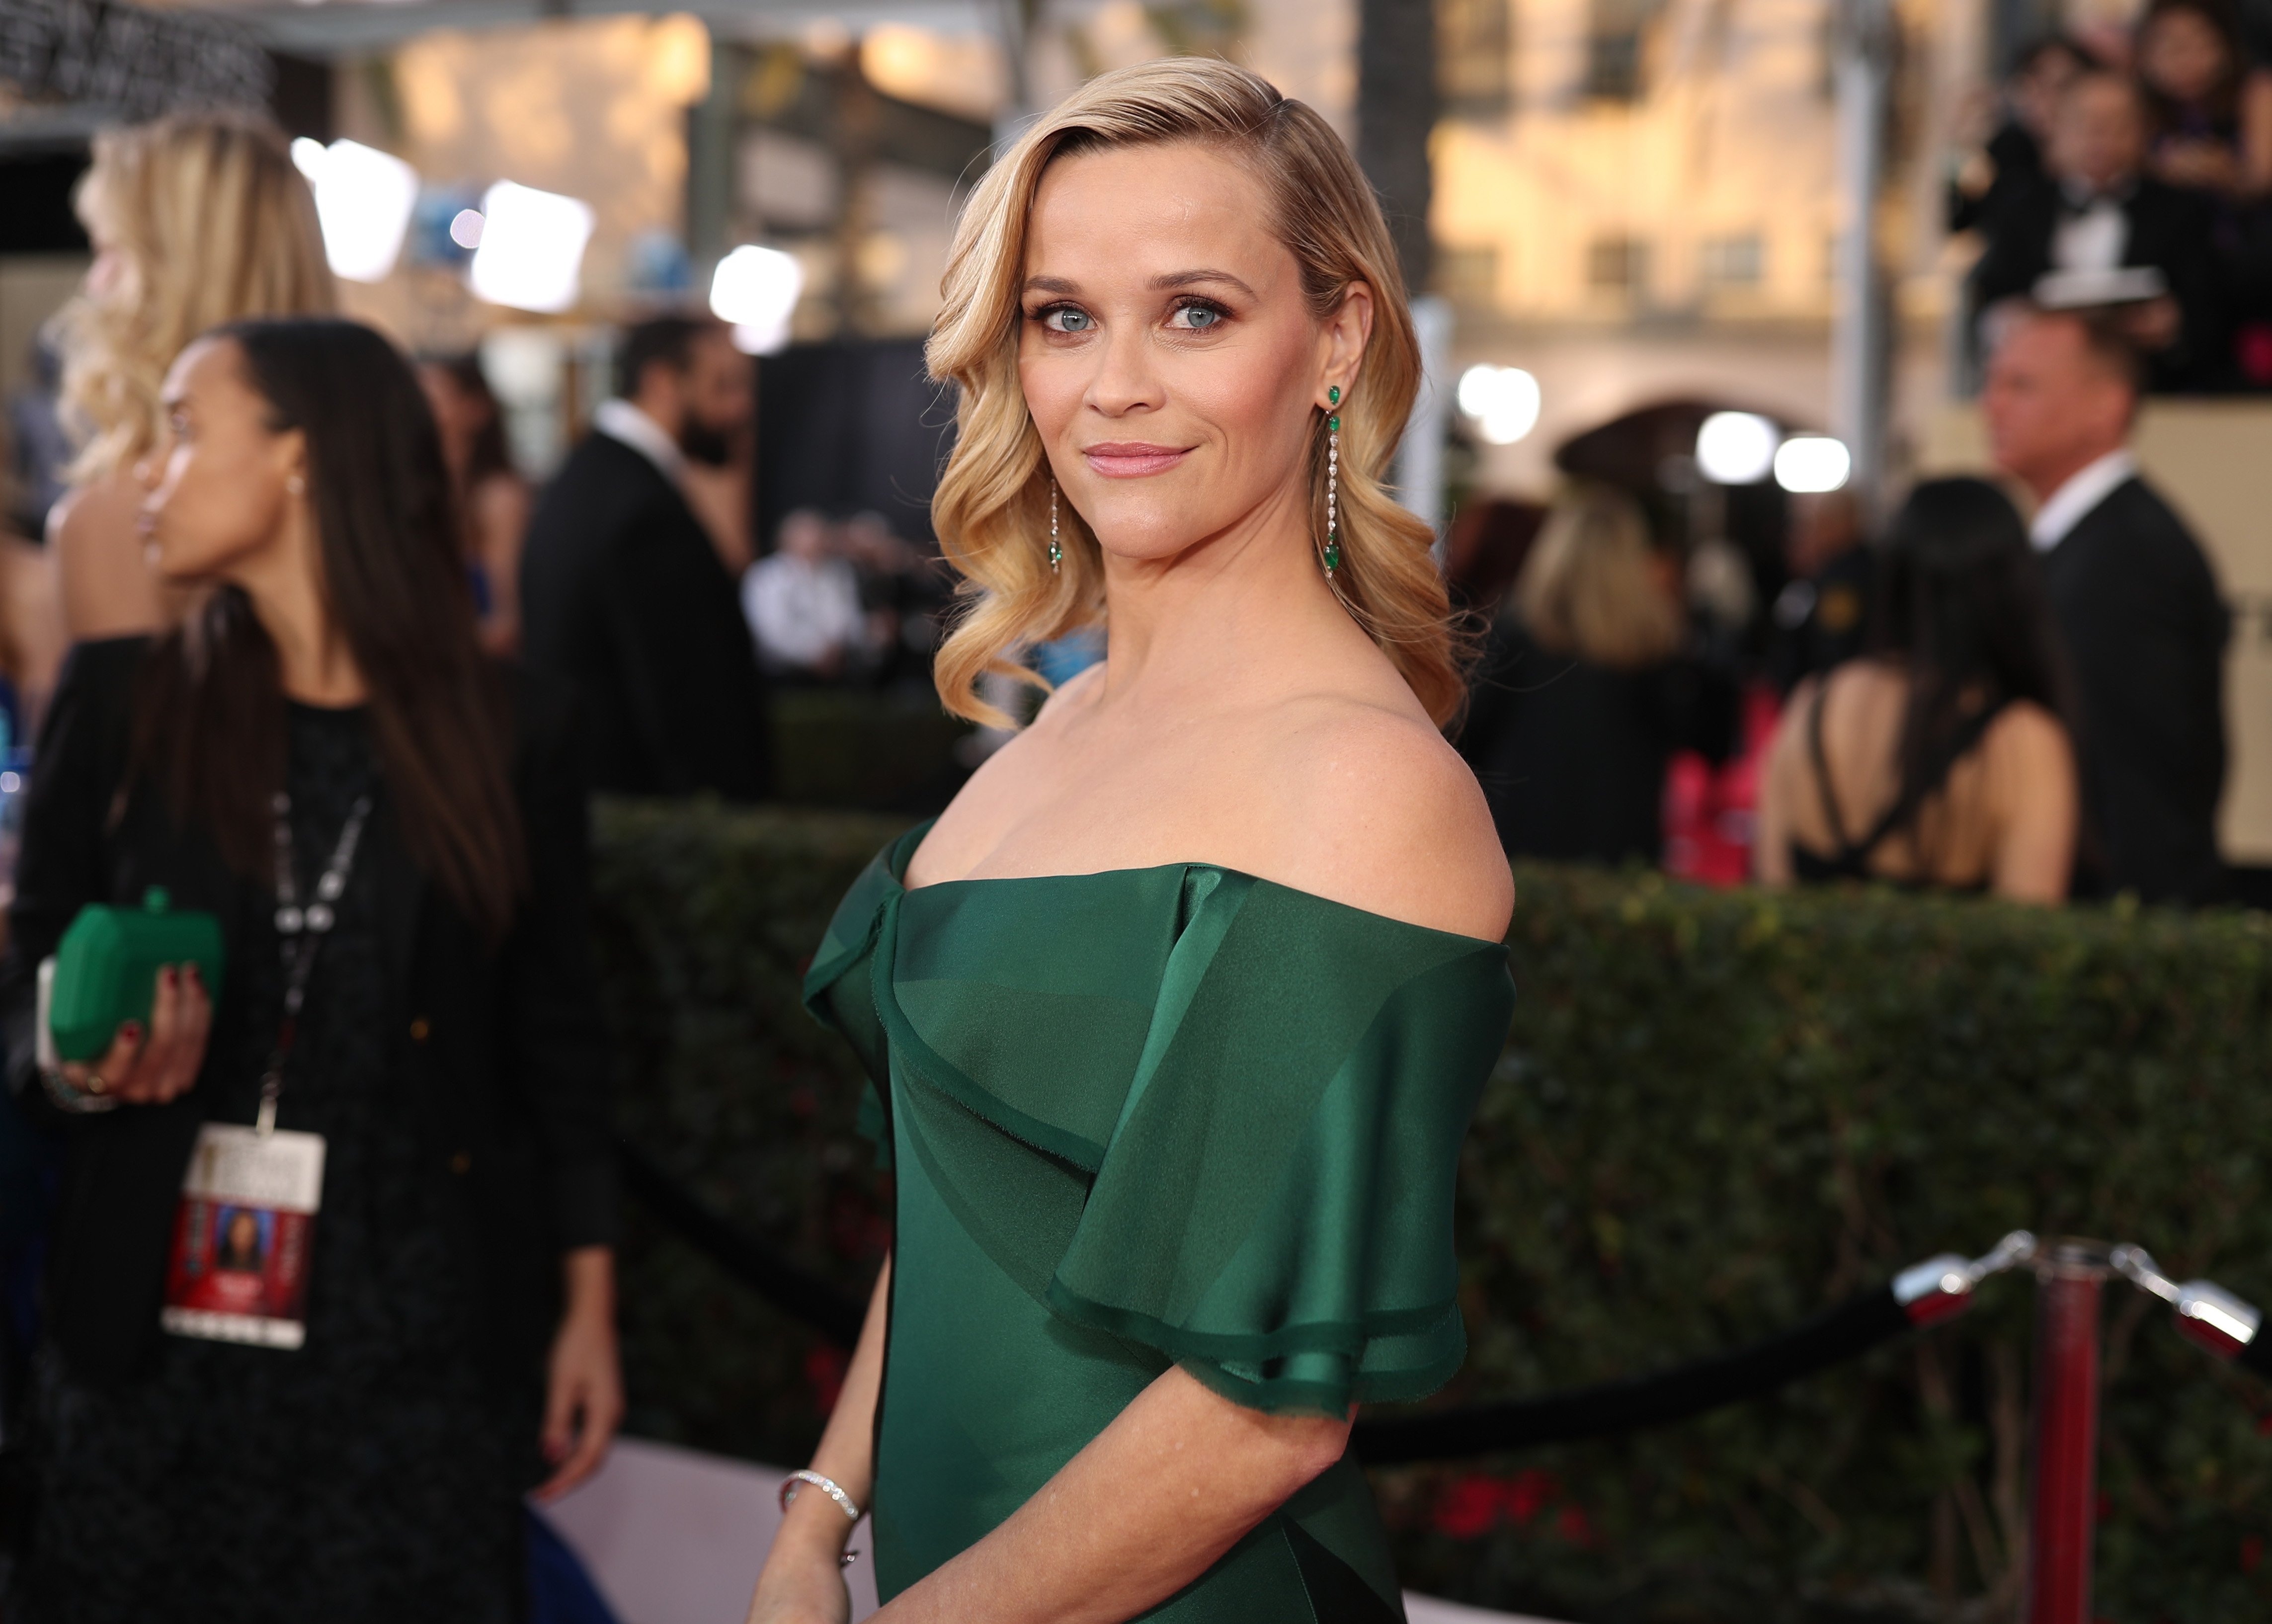 Reese Witherspoon attends the 24th Annual Screen Actors Guild Awards at The Shrine Auditorium on January 21, 2018 in Los Angeles, California. | Source: Getty Images